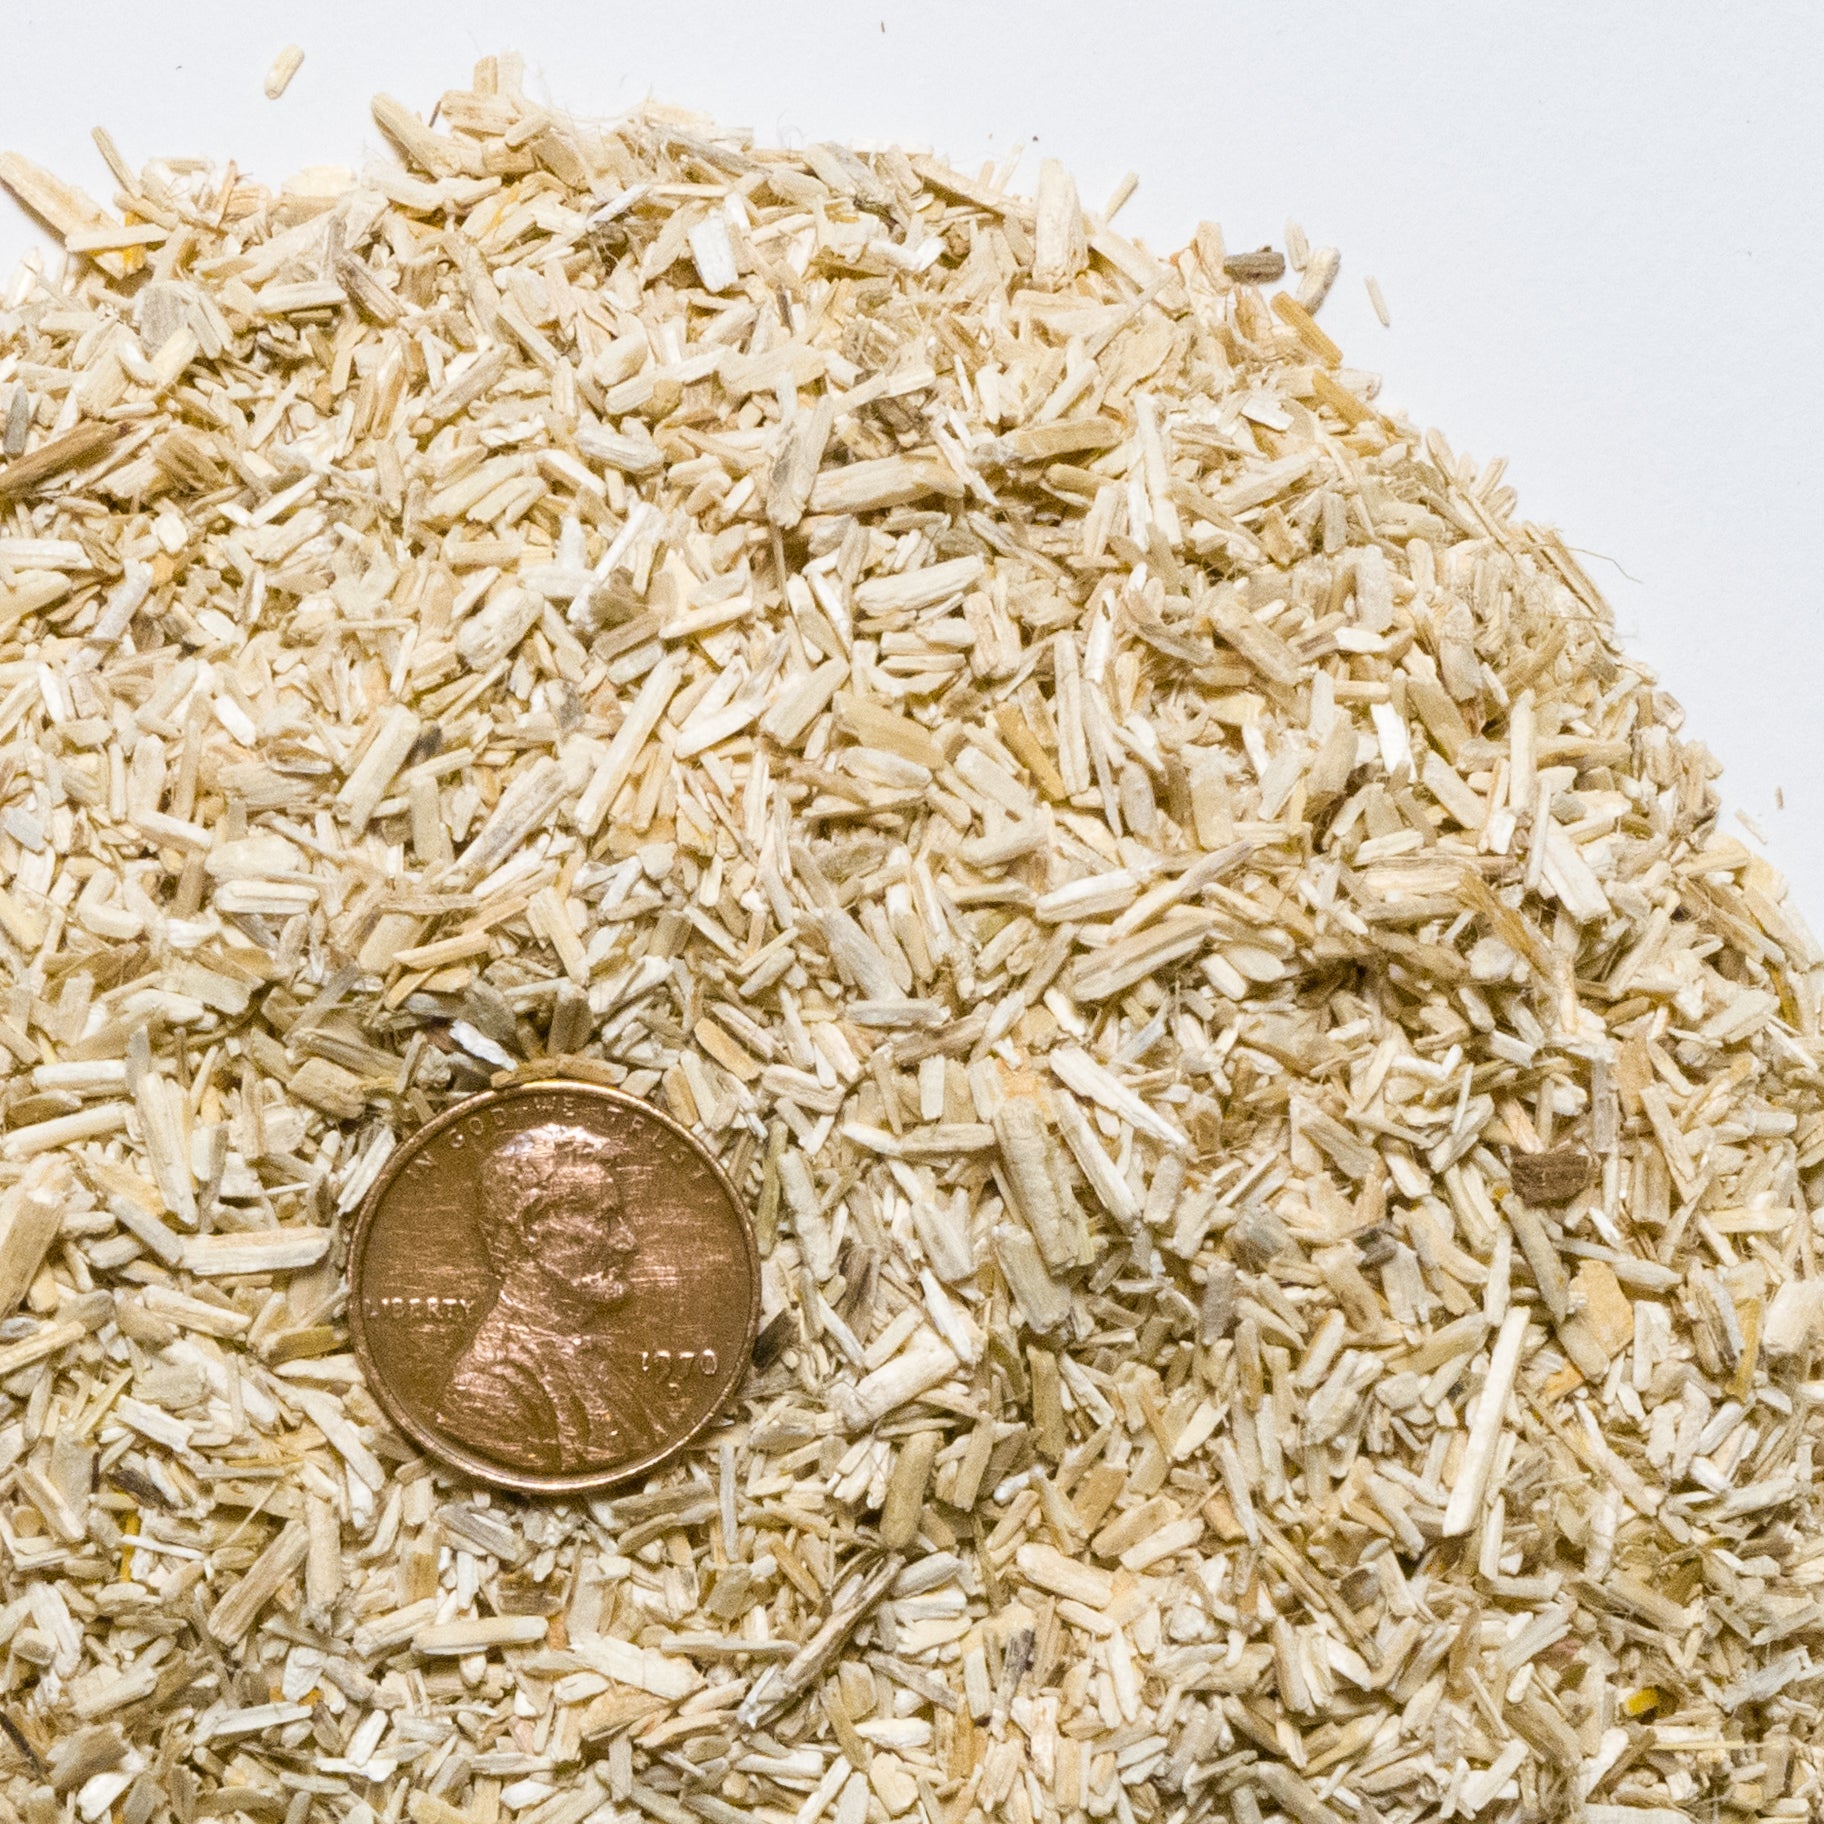 A size comparison of a USA penny on top of a mound of Tiger Fiber hemp animal bedding.